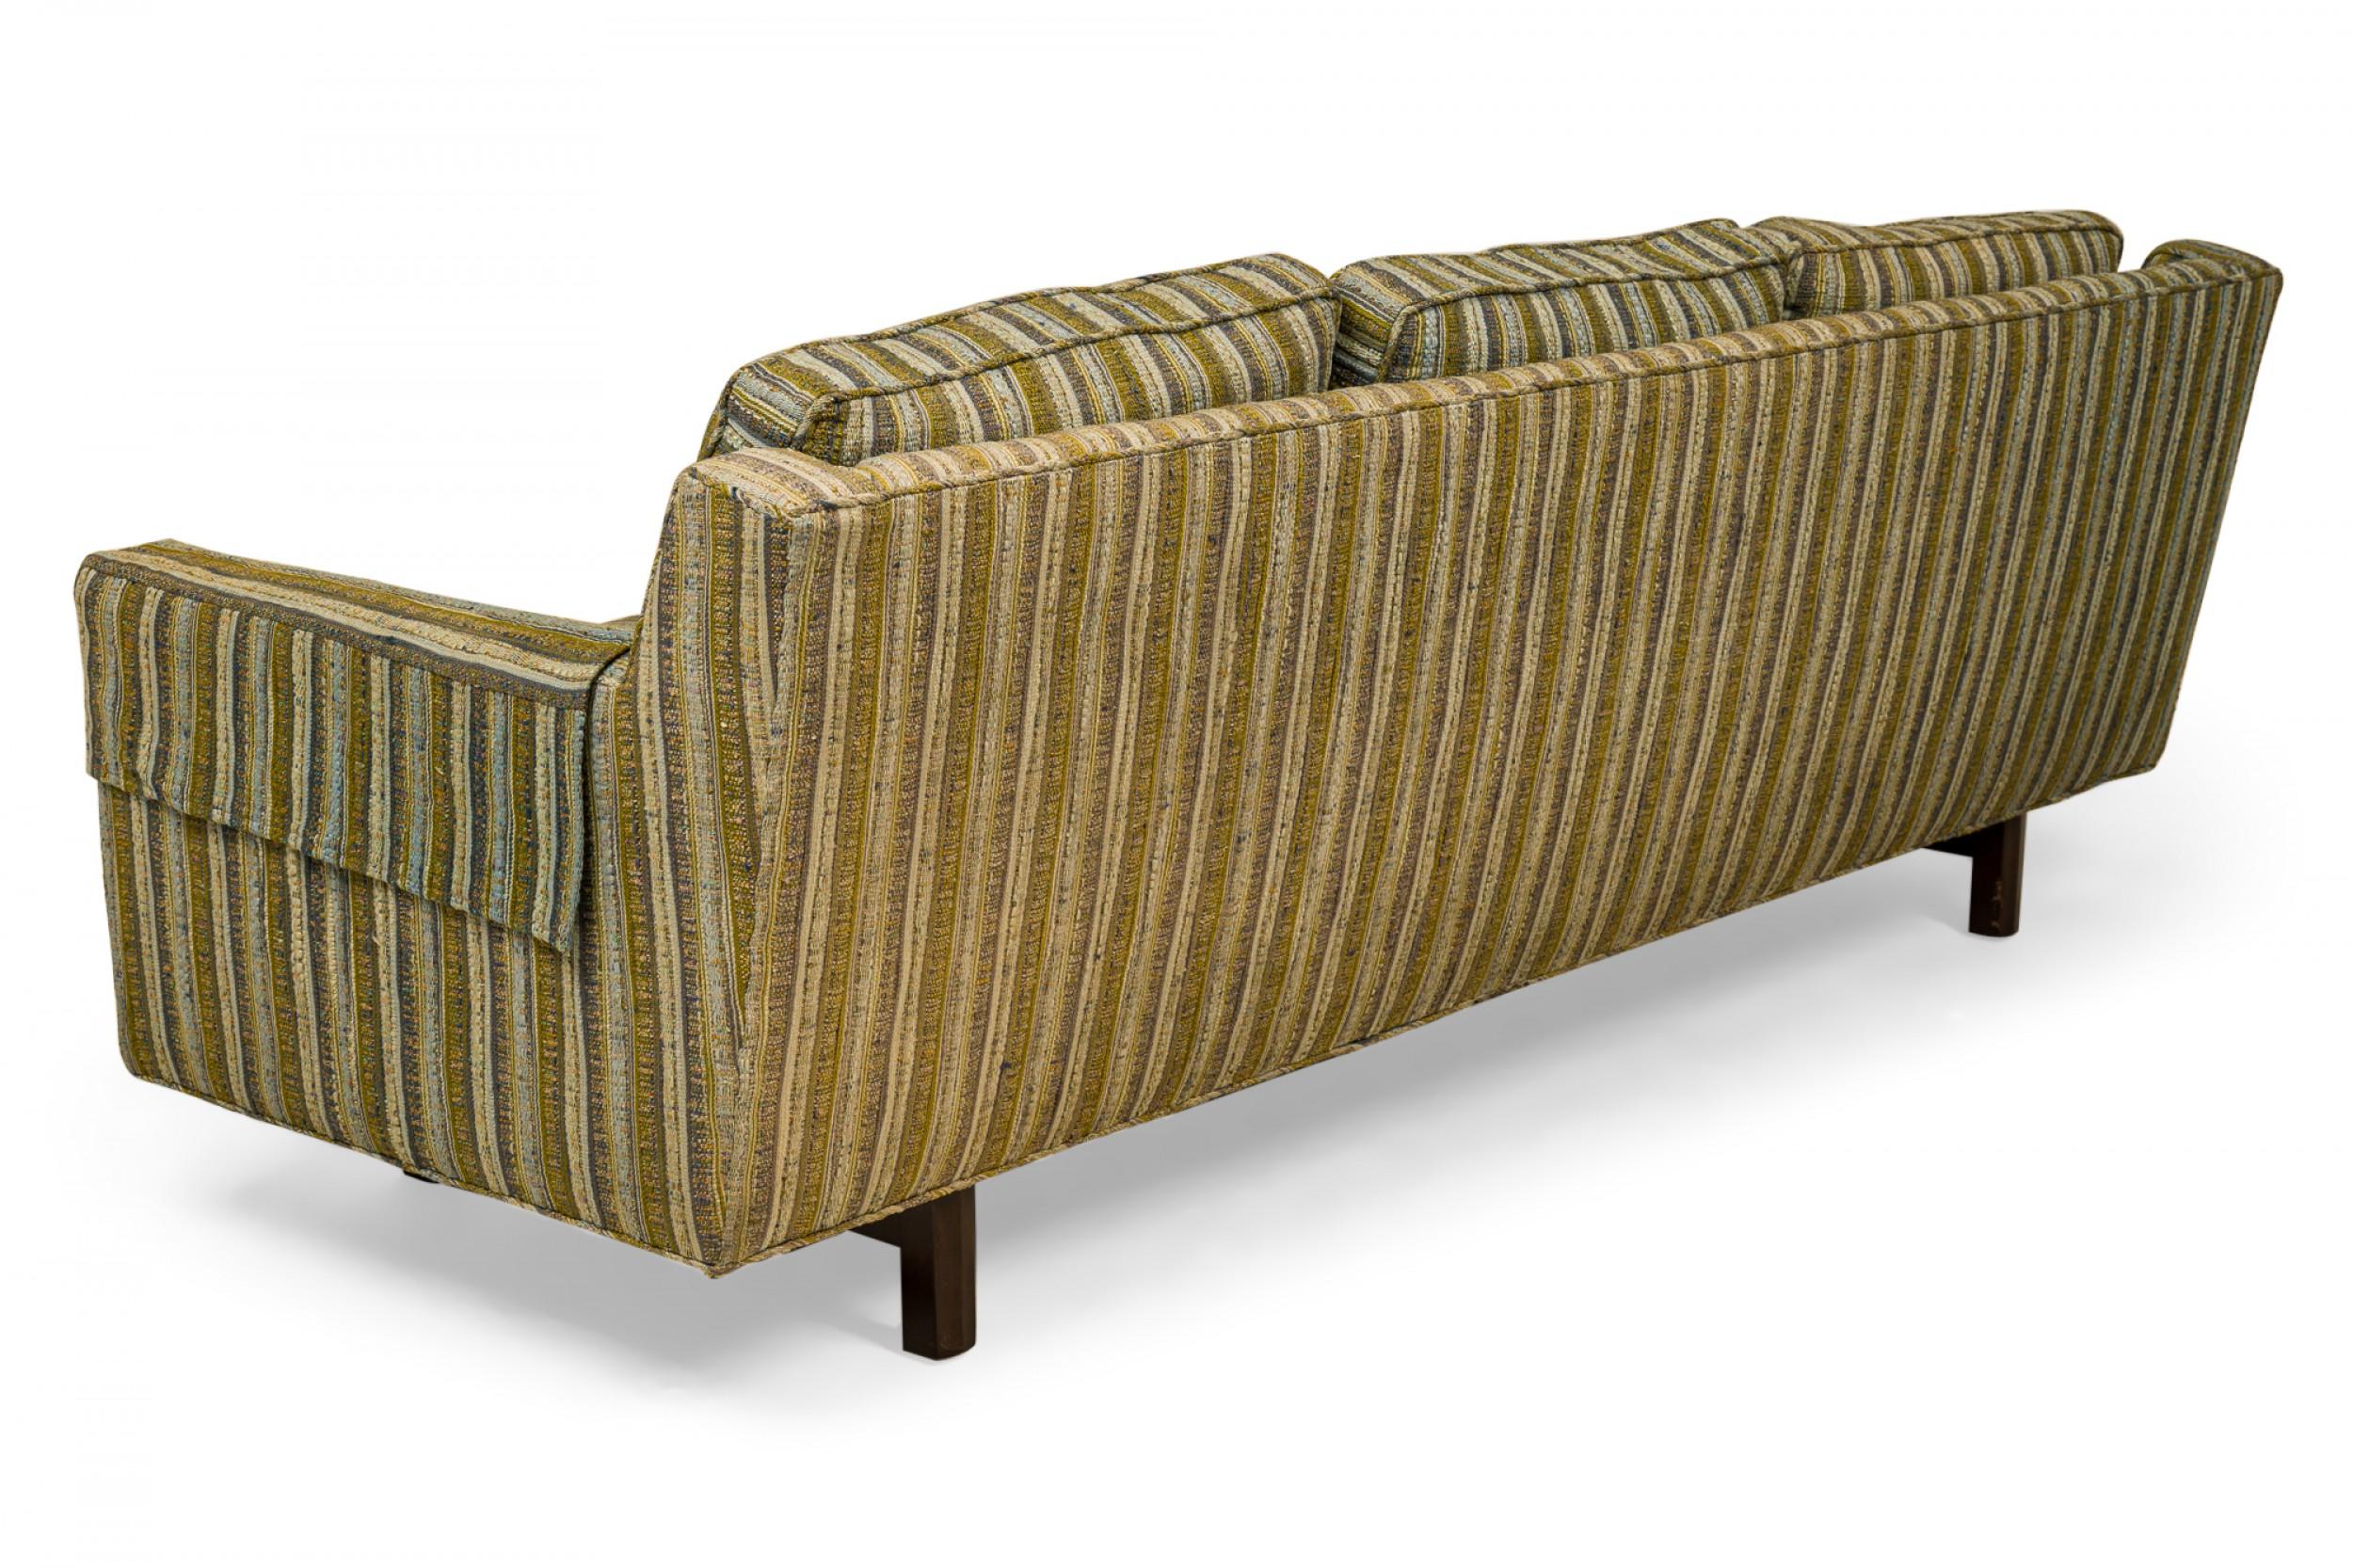 Mid-Century Modern Edward Wormley for Dunbar Green and Beige Striped Upholstered Three-Seat Sofa For Sale